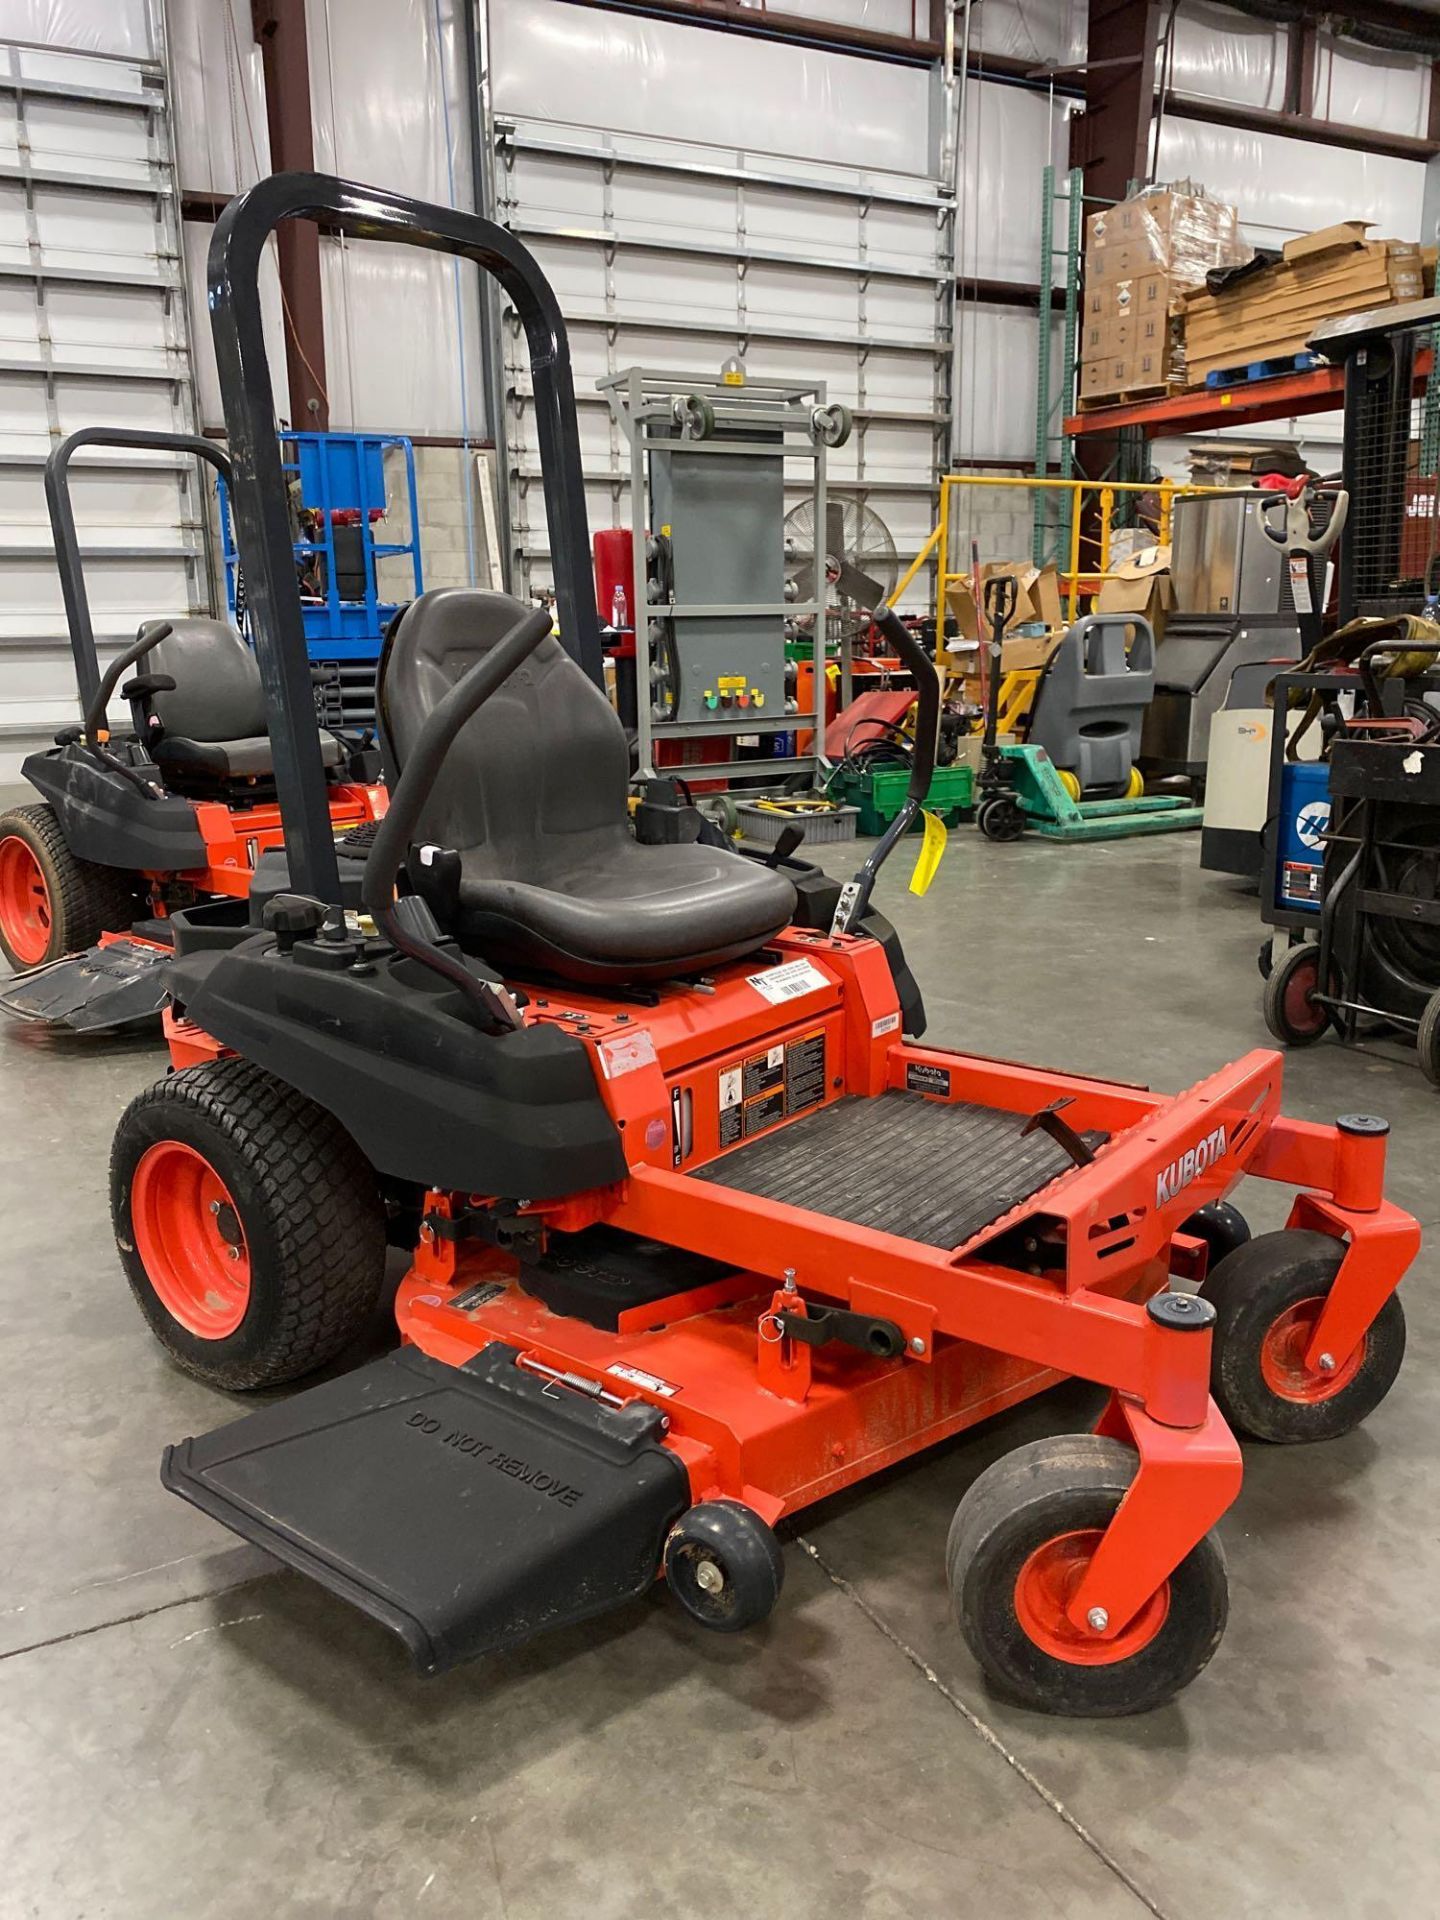 2016 KUBOTA Z122RKW 42" RIDE ON MOWER, 3.9 HOURS SHOWING, RUNS AND OPERATES - Image 3 of 9